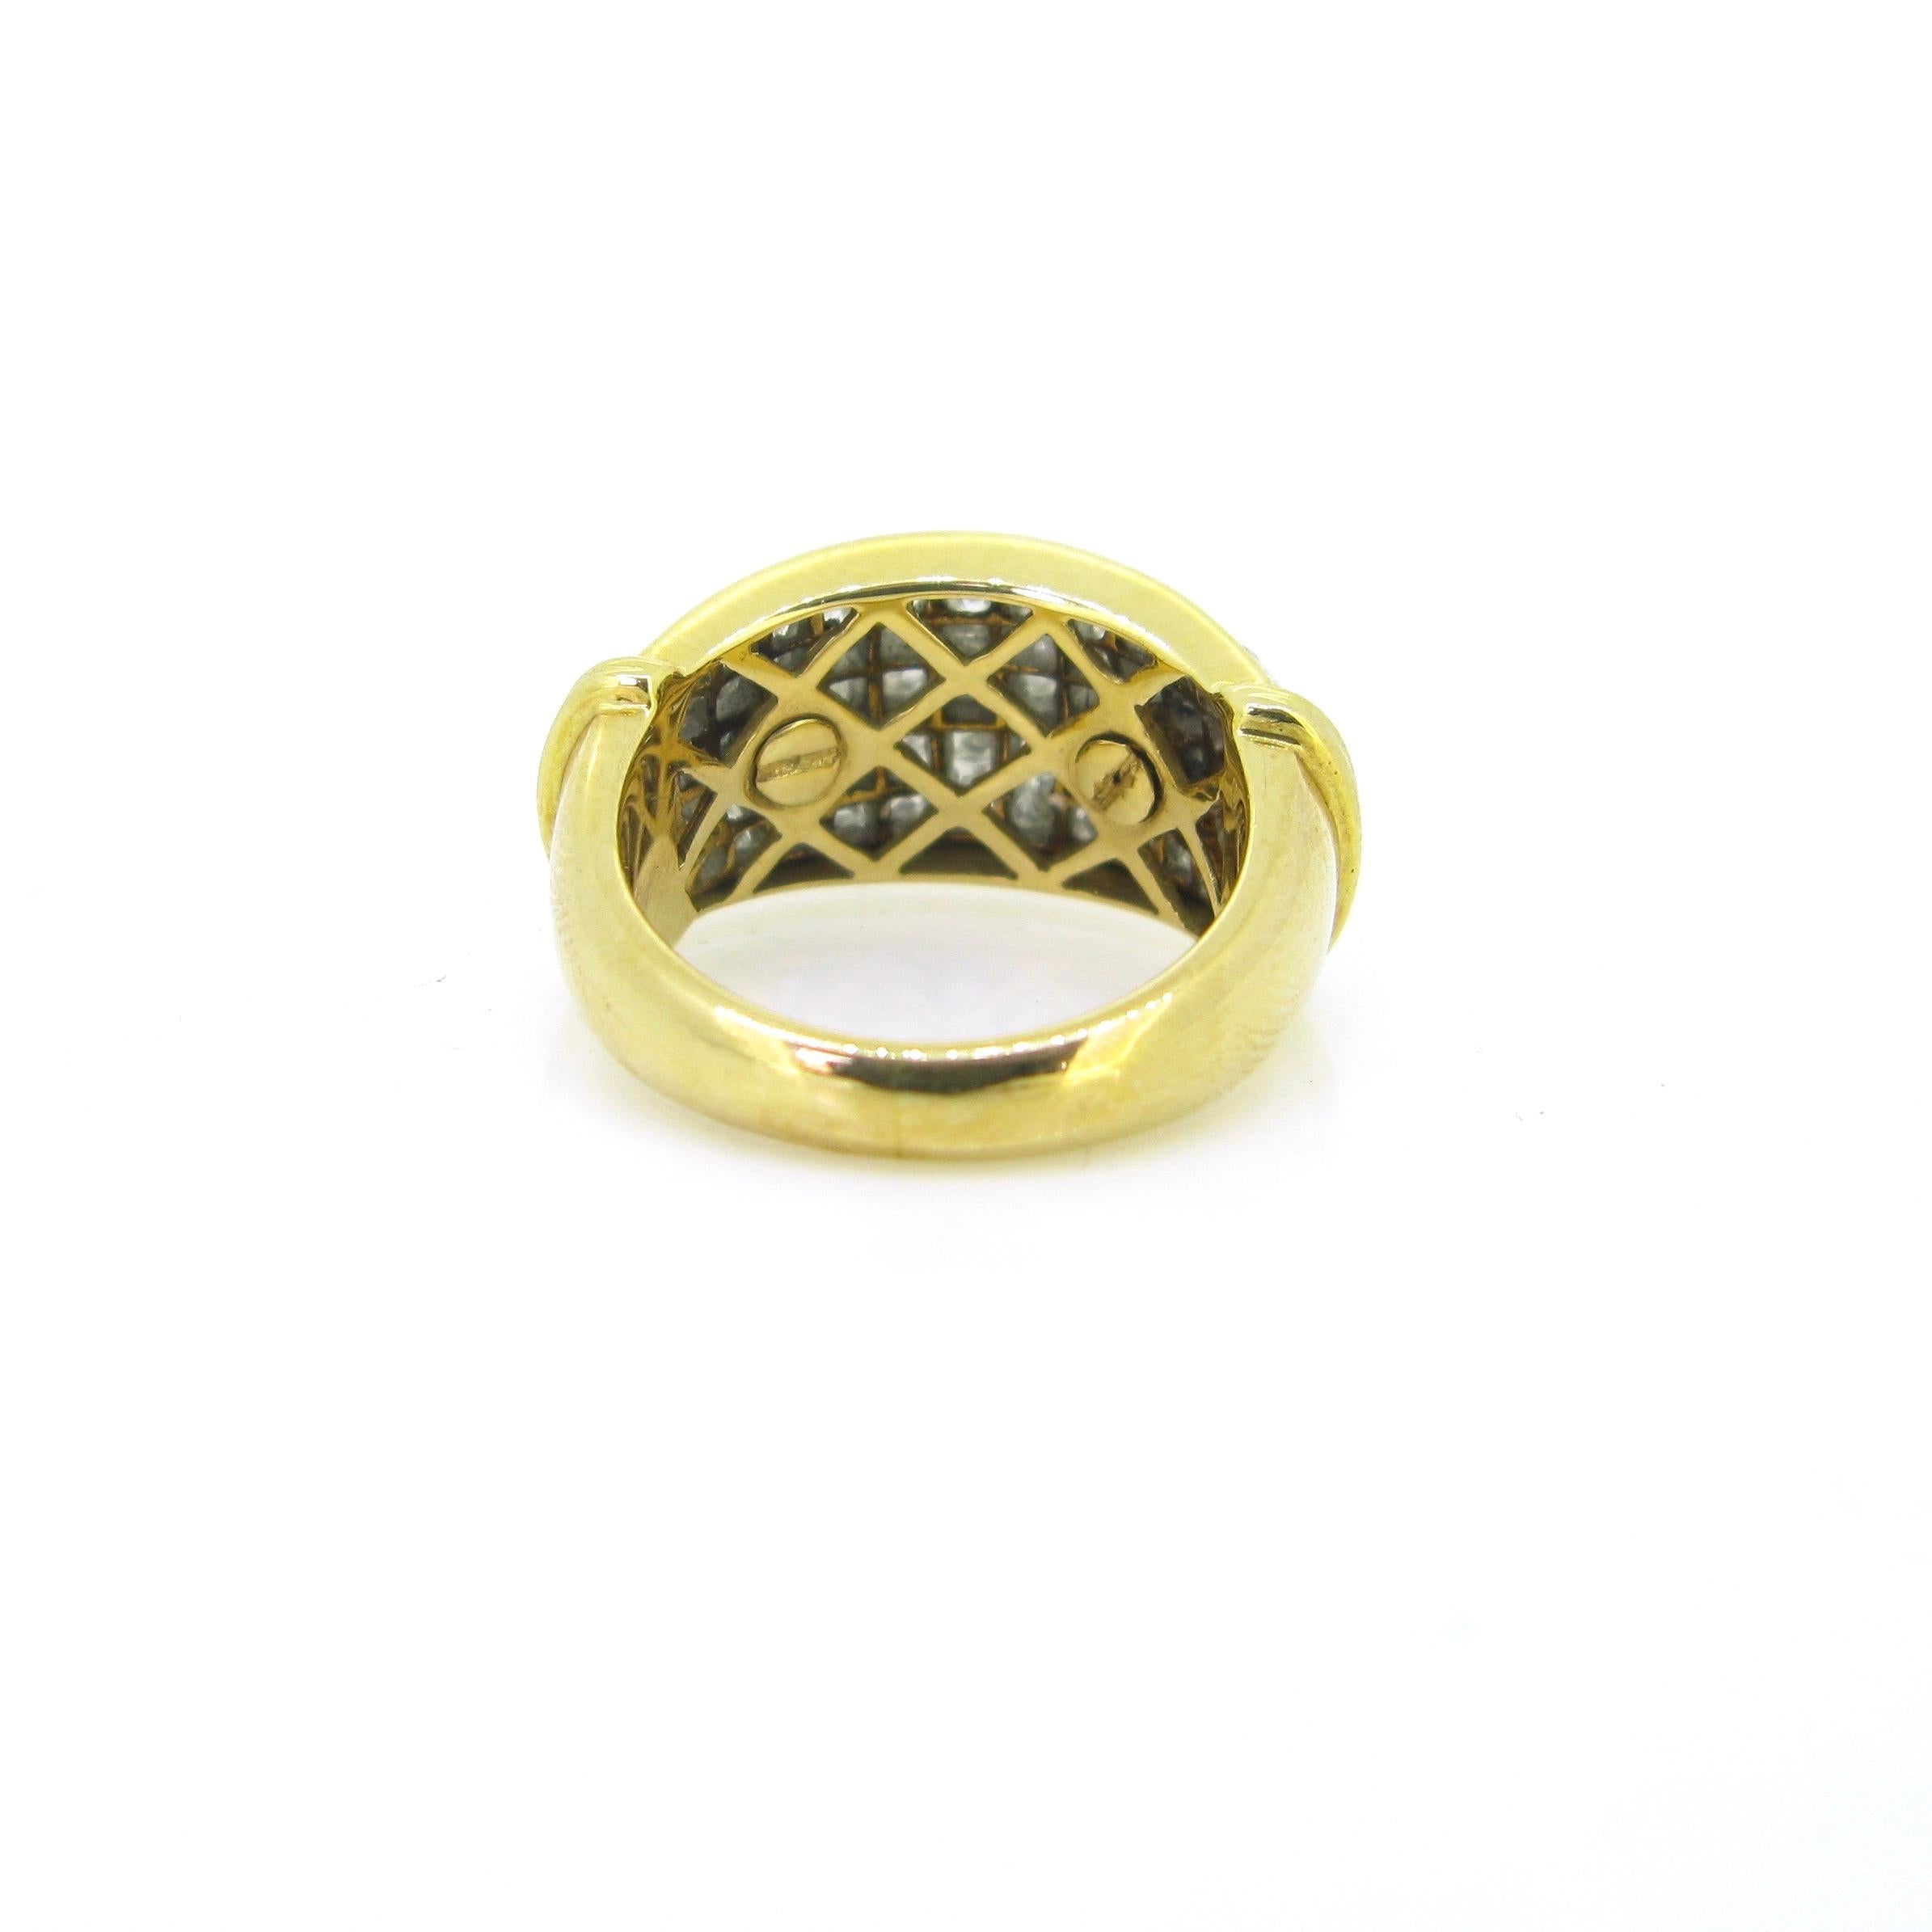 Princess Cut Diamonds Serti Mysterieux Yellow Gold Pave Band Dome Cocktail Ring 1